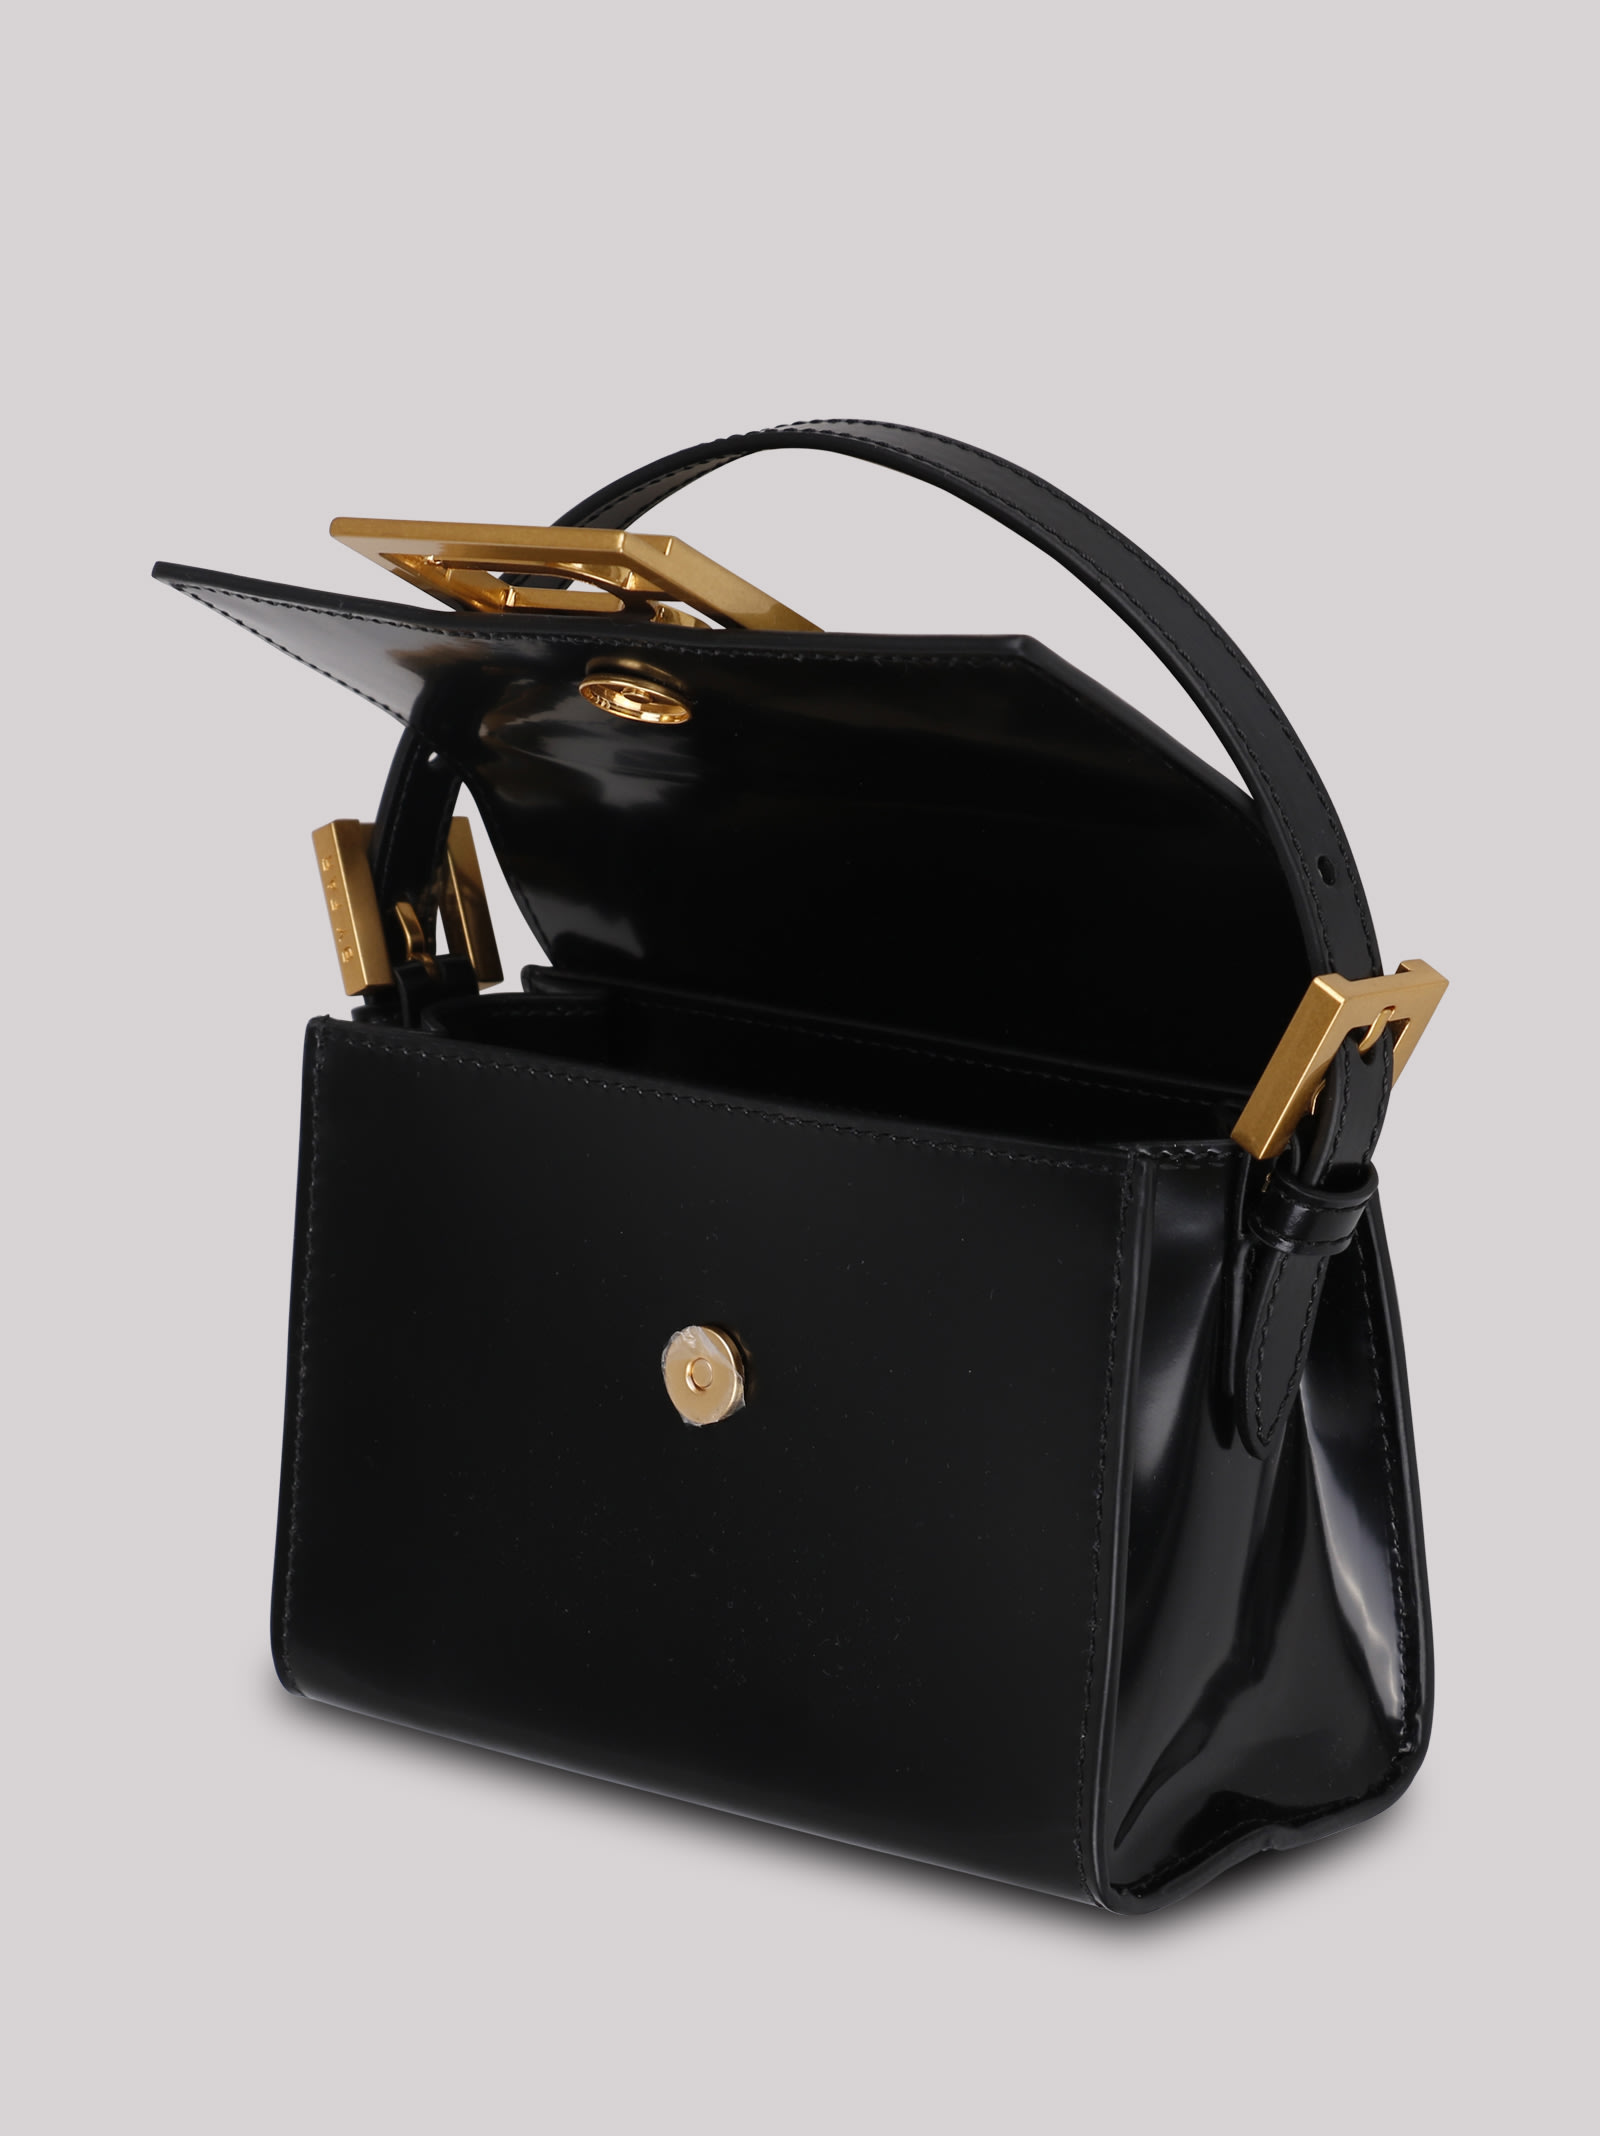 by Far - Black Patent Leather Fran Logo Plaque Tote Bag